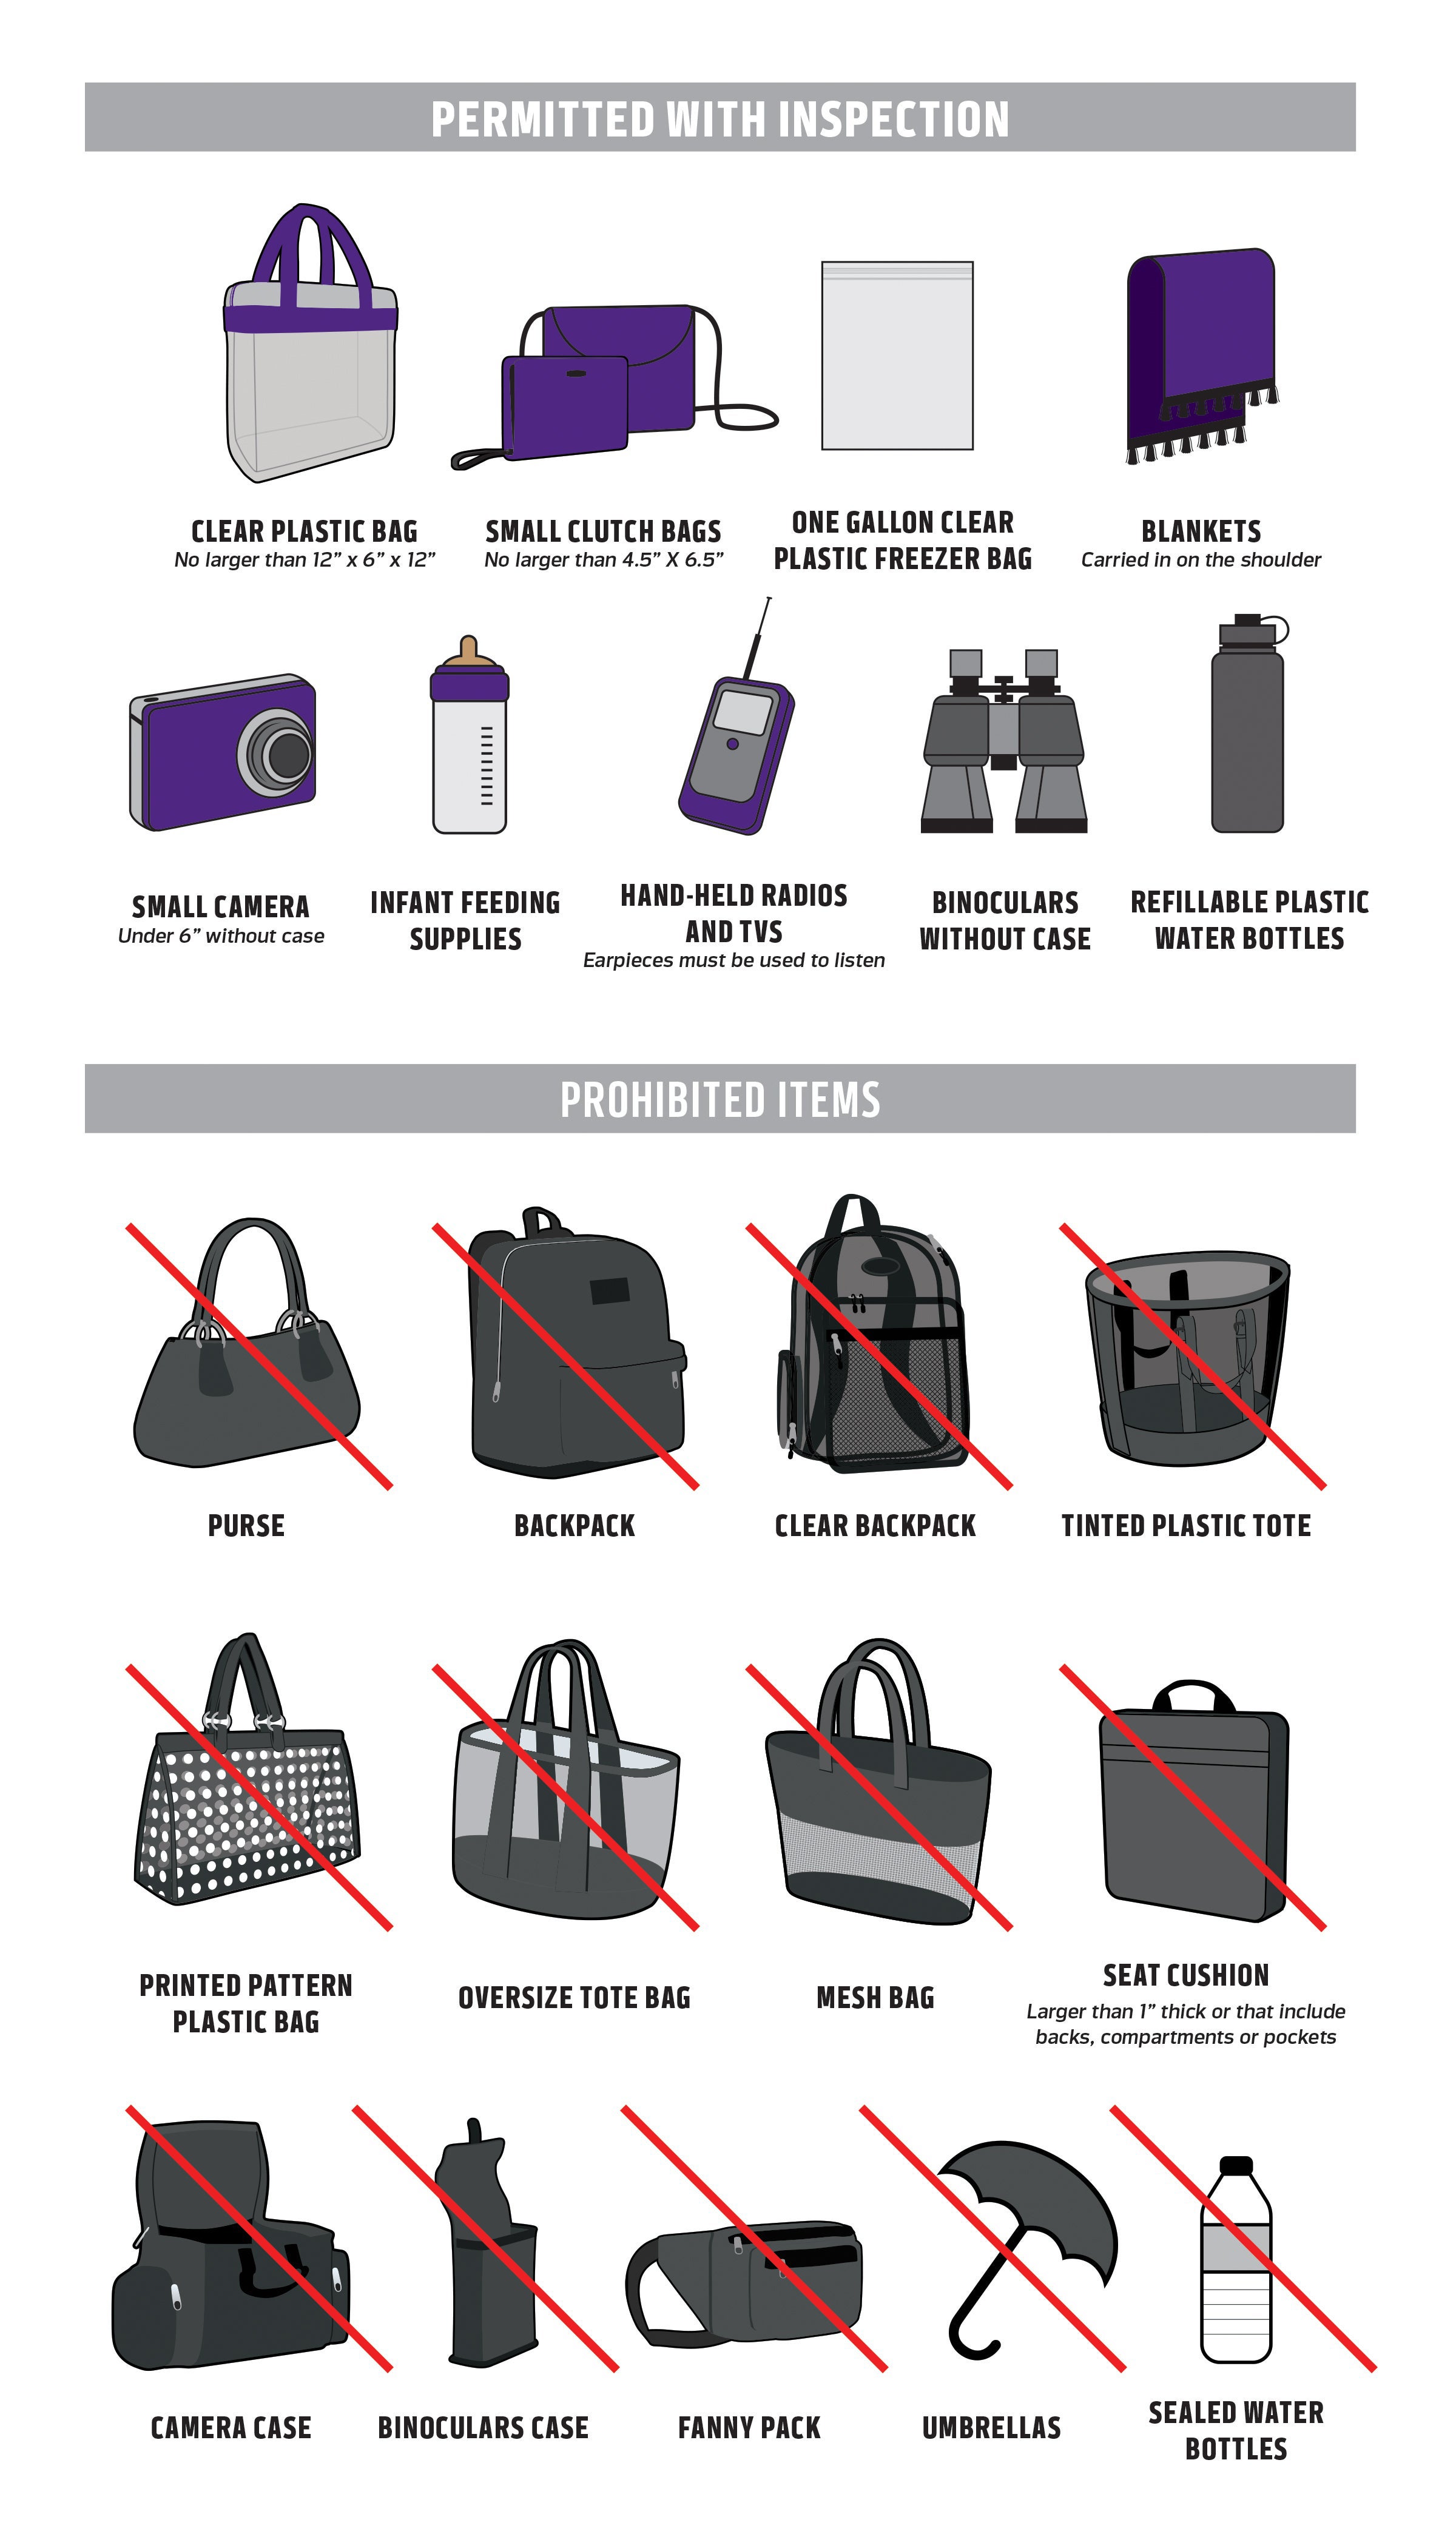 Clear Bag Policy - Liberty University